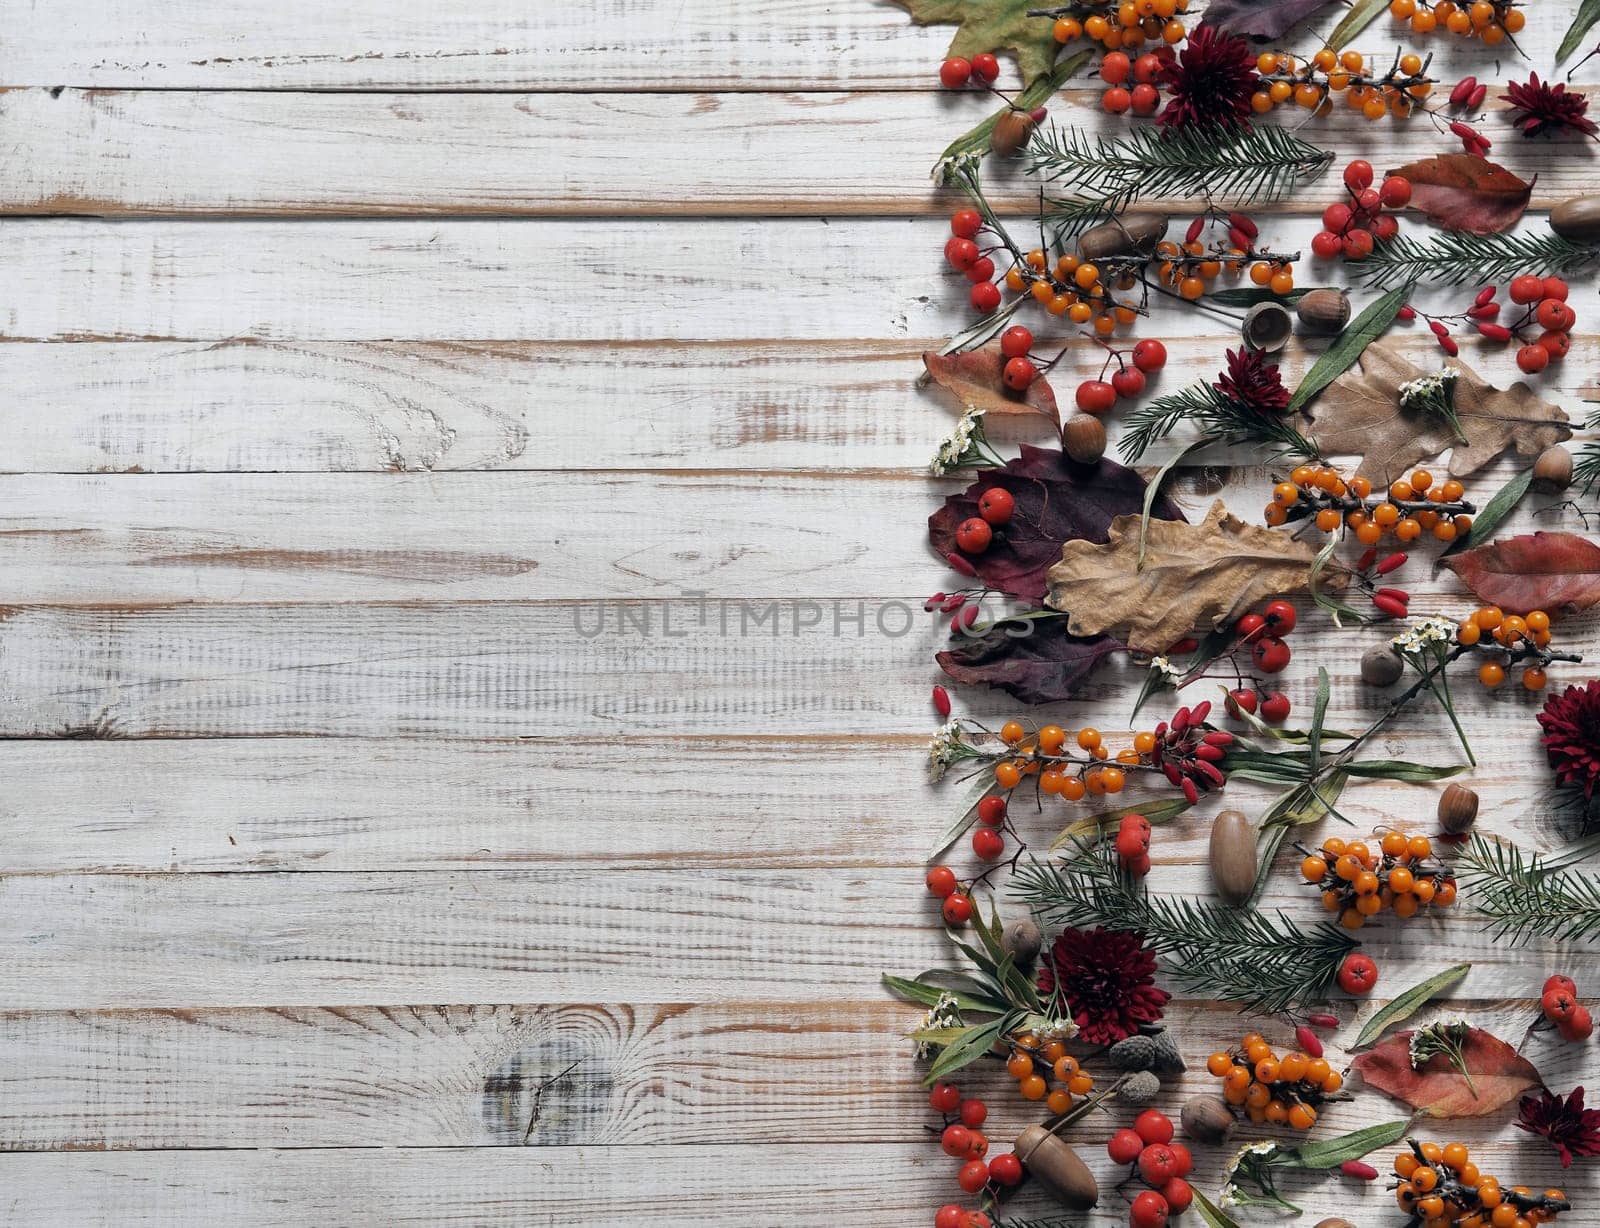 Space for text.Autumn.Background from medicinal berries of sea buckthorn,barberry,rowanberry, nuts and plant twigs on a white wooden table.Concept of medicinal plants.